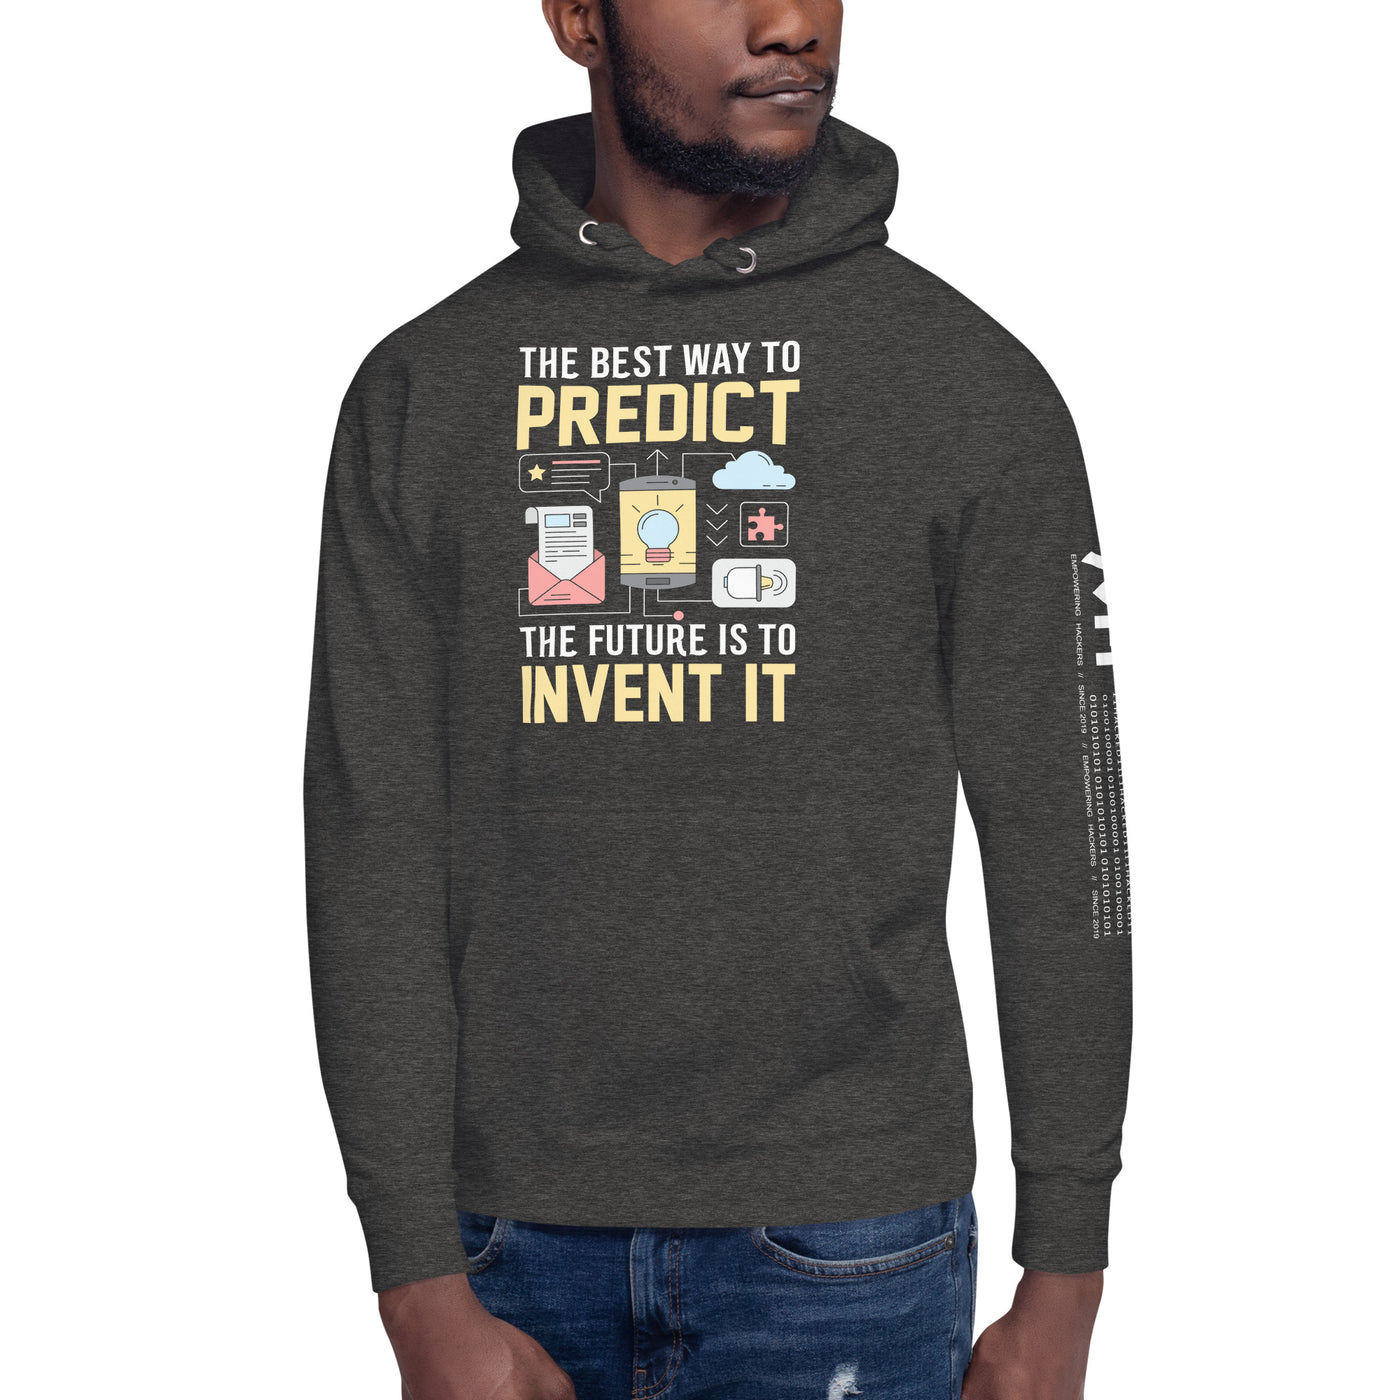 The Best Way to Predict Future is to invent it Unisex Hoodie